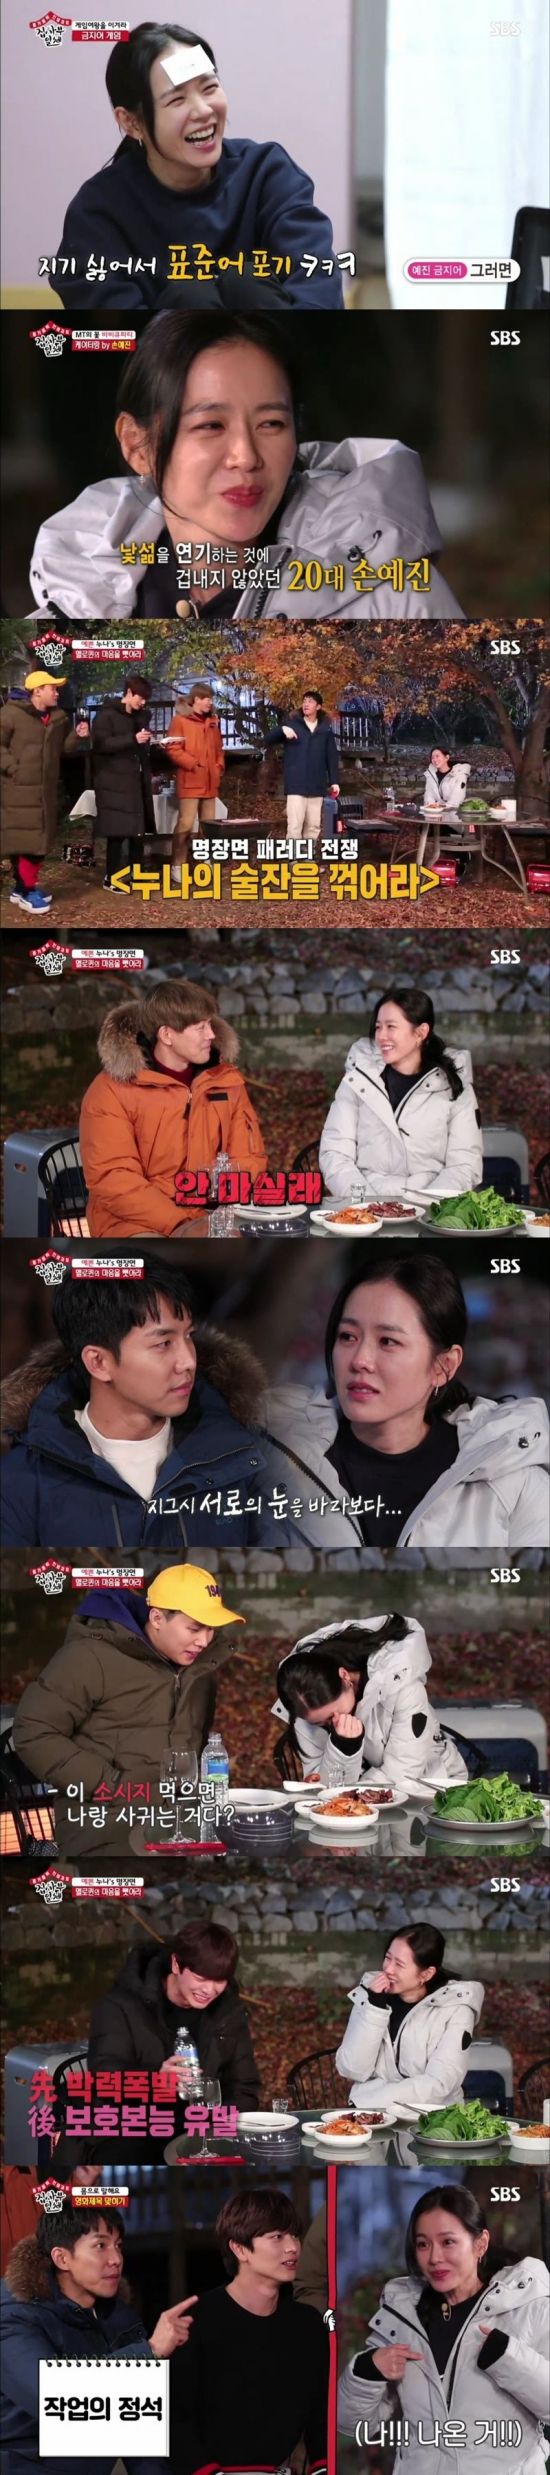 <p> Actress Son Ye-jin this All The Butlers members and 1 years later a reunion to some of the best 1 minute decorating.</p><p>9 will be broadcast SBS TV All The Butlersfurniture audience 11. 1%, the Top 14. 2%(Nielsen Korea Metropolitan Part 2 of the standard).</p><p>This day, All The Butlersin actor Lee Sang-yoon, the singer Lee Seung-gi, comedian Yang Se-hyeong, a group BtoBs nurturing presence is 1 anniversary of Son Ye-jin together with the special MT, enjoying the look was unveiled.</p><p>Son Ye-jin is a game from the dance until the perfect preparation and competencies with members and captivate viewers. He is a long time top keep the top of the actors meticulous planning and self-management course, human attraction and the perfect one of all.</p><p>First member and Son Ye-jin is dinner time and that the ban gamethe body into the pool. Son Ye-jin to break down for the members of the co-op this with Son Ye-jin is the star of this fall-off was avoided. Eventually foster and Lee Seung-gi defeat to dinner preparation began. The two Son Ye-jin this directly to the prepared ingredients into the barbecue to create and Son Ye-jin and MT is absurd. A real gift,and tingle you.</p><p>Meal after the game. Son Ye-jin and the members body speakto the movie title to fit the game to progress. Lee Seung-gi and Foster, Lee Sang-yoon and Yang Se-hyeong each team and Son Ye-jin in this dices. Yang Se-hyeong is Lee Sang-yoon and the illusion of breathing and bet lightly in victory, or in the exemption.</p><p>Since Son Ye-jin is a member of the three do share(三人行必有我師)from three people with of them necessarily in one person is the master of that story,and 1 use some of the to be proposed. Son Ye-jin of the Ministry changed into Lee Seung-gi, Lee Sang-yoon, Yang Se-hyeong, nurture creative self-confident theme 10 minutes into the lecture began.</p><p>Lee Sang-yoon is the argument for using the speed mental arithmetic, Yang Se-hyeong is the horse into the River, Lee Seung-gi is 25 years old expensive chat method, six women, and karaoke atmosphere in the bootstrap of the river. Since the karaoke practice is unfolded, and Son Ye-jins excitement exploded and eye-catching. The rabbit who wrote Son Ye-jin is a member with them for their bus inand the gorgeous stage. It is a reversal of attractive members was originally hyped a lot and playing well sister. teach drill there was no need,said Marvel.</p><p>The next morning, Son Ye-jin is members toast to directly and together the two walk out on her. Son Ye-jin is a member them, I promise. And, with the promise of a man and the promise of the all importanta few days promise to do one next year kept the show will be fun,he said.</p><p>This nurturing presence is the solo album challenge, Lee Seung-gi is a week-long trip to the desert, Yang Se-hyeong - guitars, Lee Sang-yoon is playing the piano to the goals for next year as promised. Finally Son Ye-jin in the next year All The Butlers from themembers meet again in the promise was kept to verify that the2019 re-Smoking pledge. That scene, per minute viewership of 14. 2%of the best 1 minute accounted.</p>